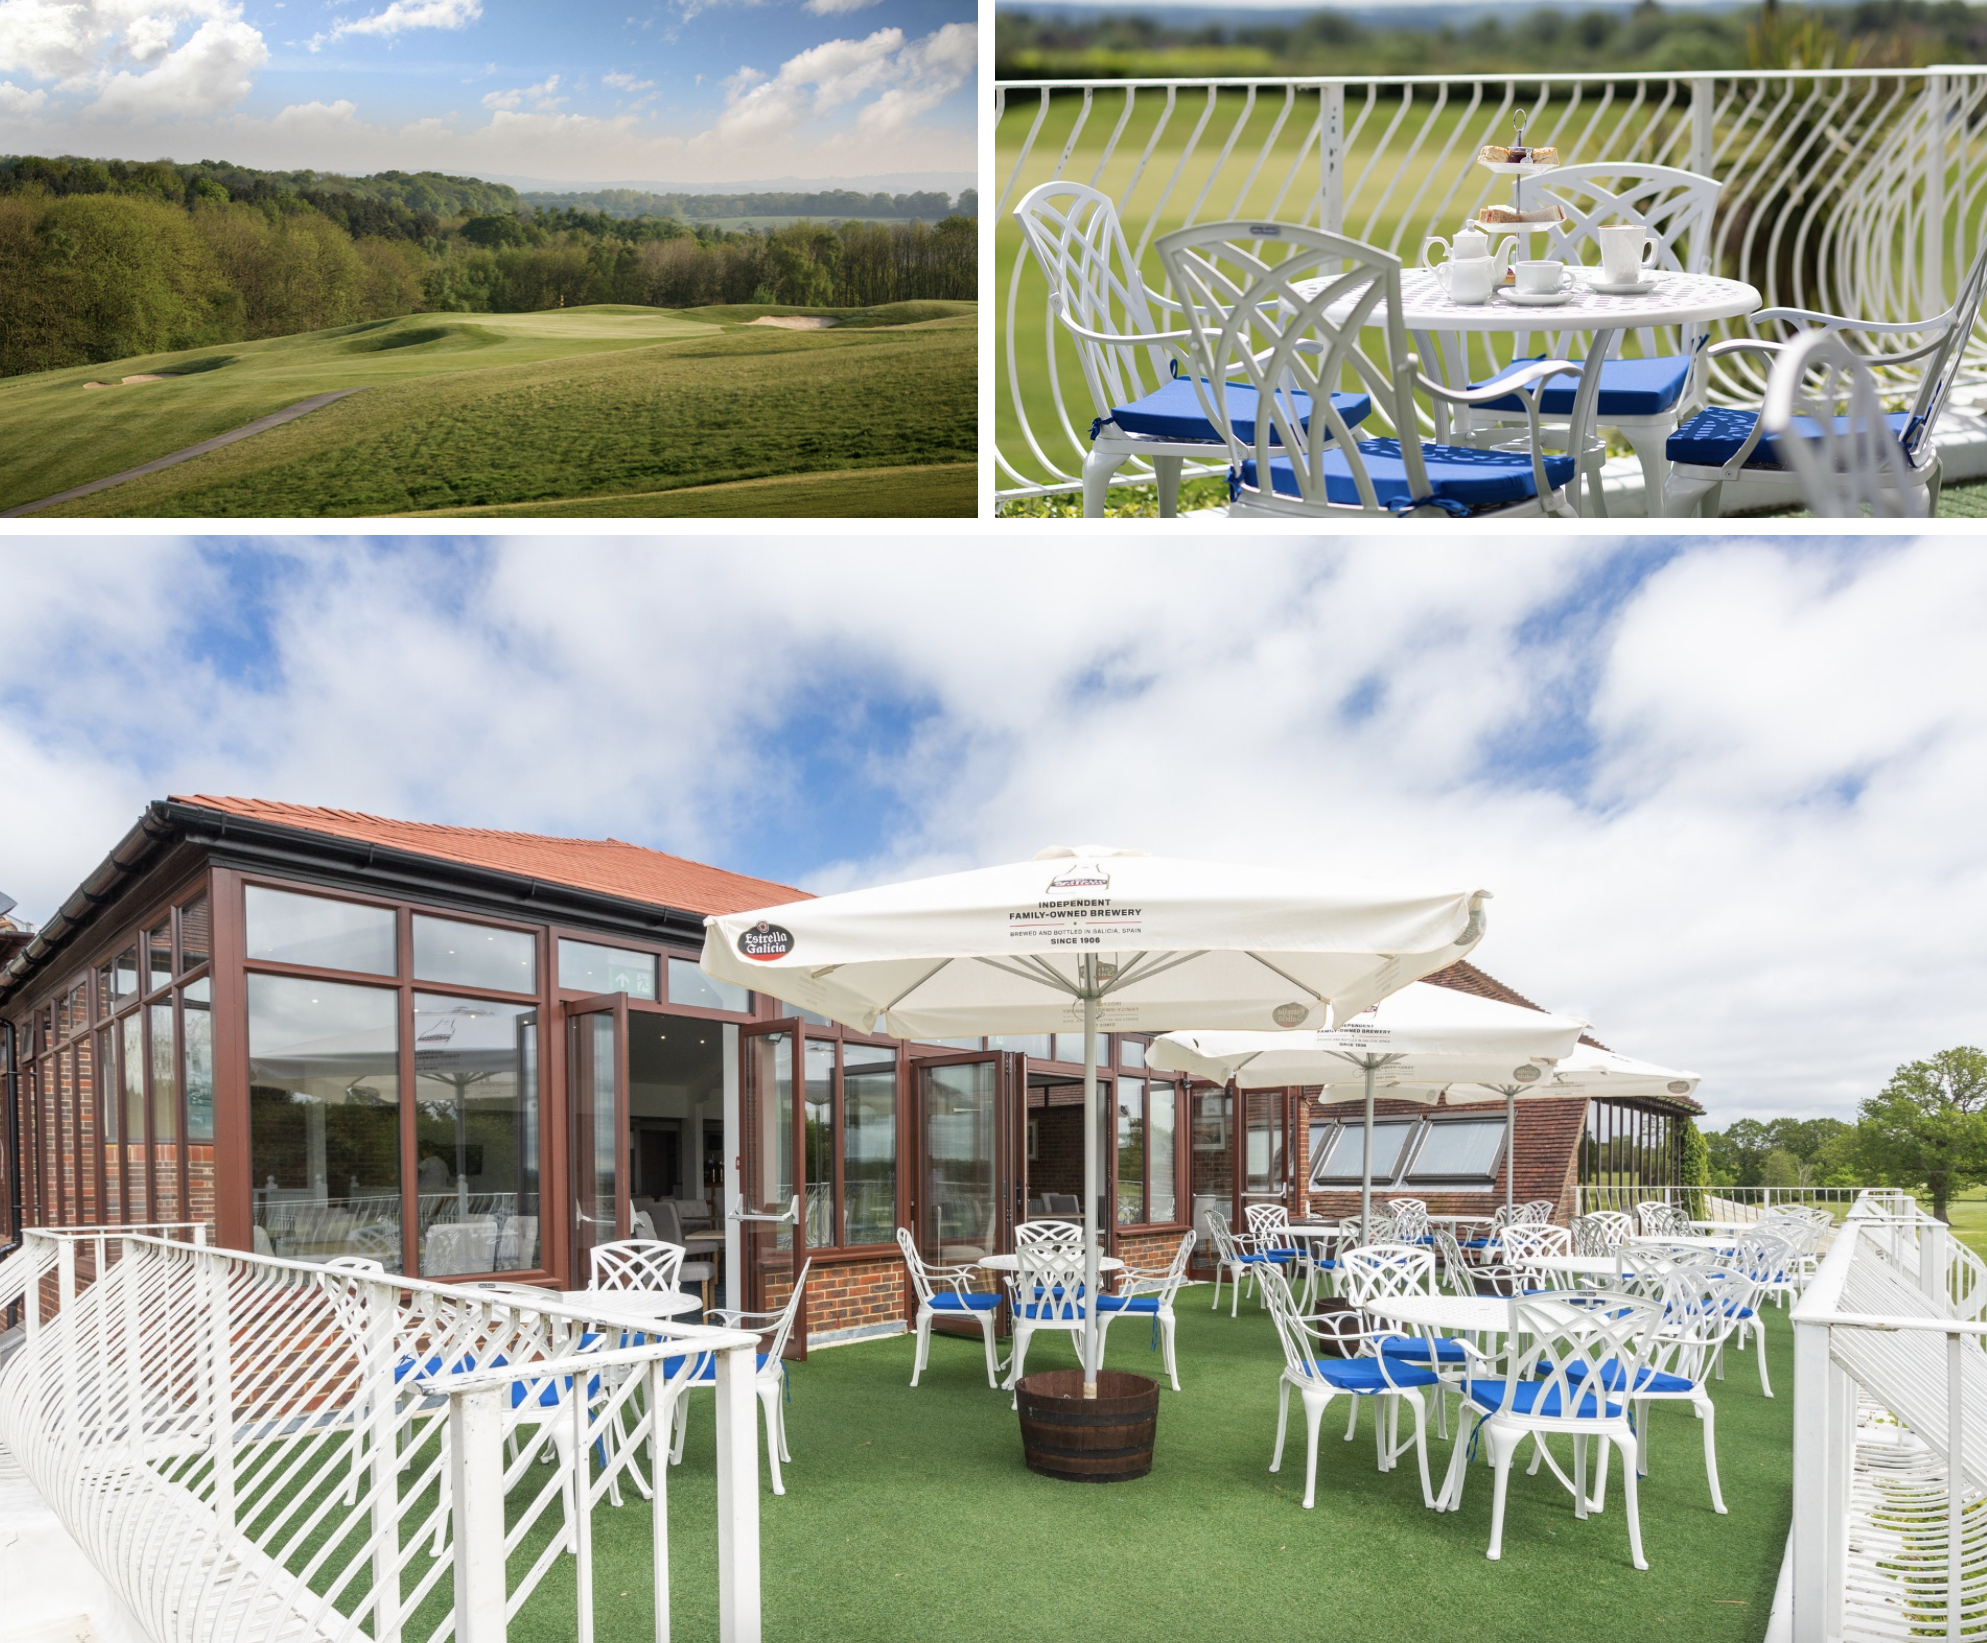 Lazy Susan Trade Garden Furniture Customers | Dale Hill Hotel and Golf Club